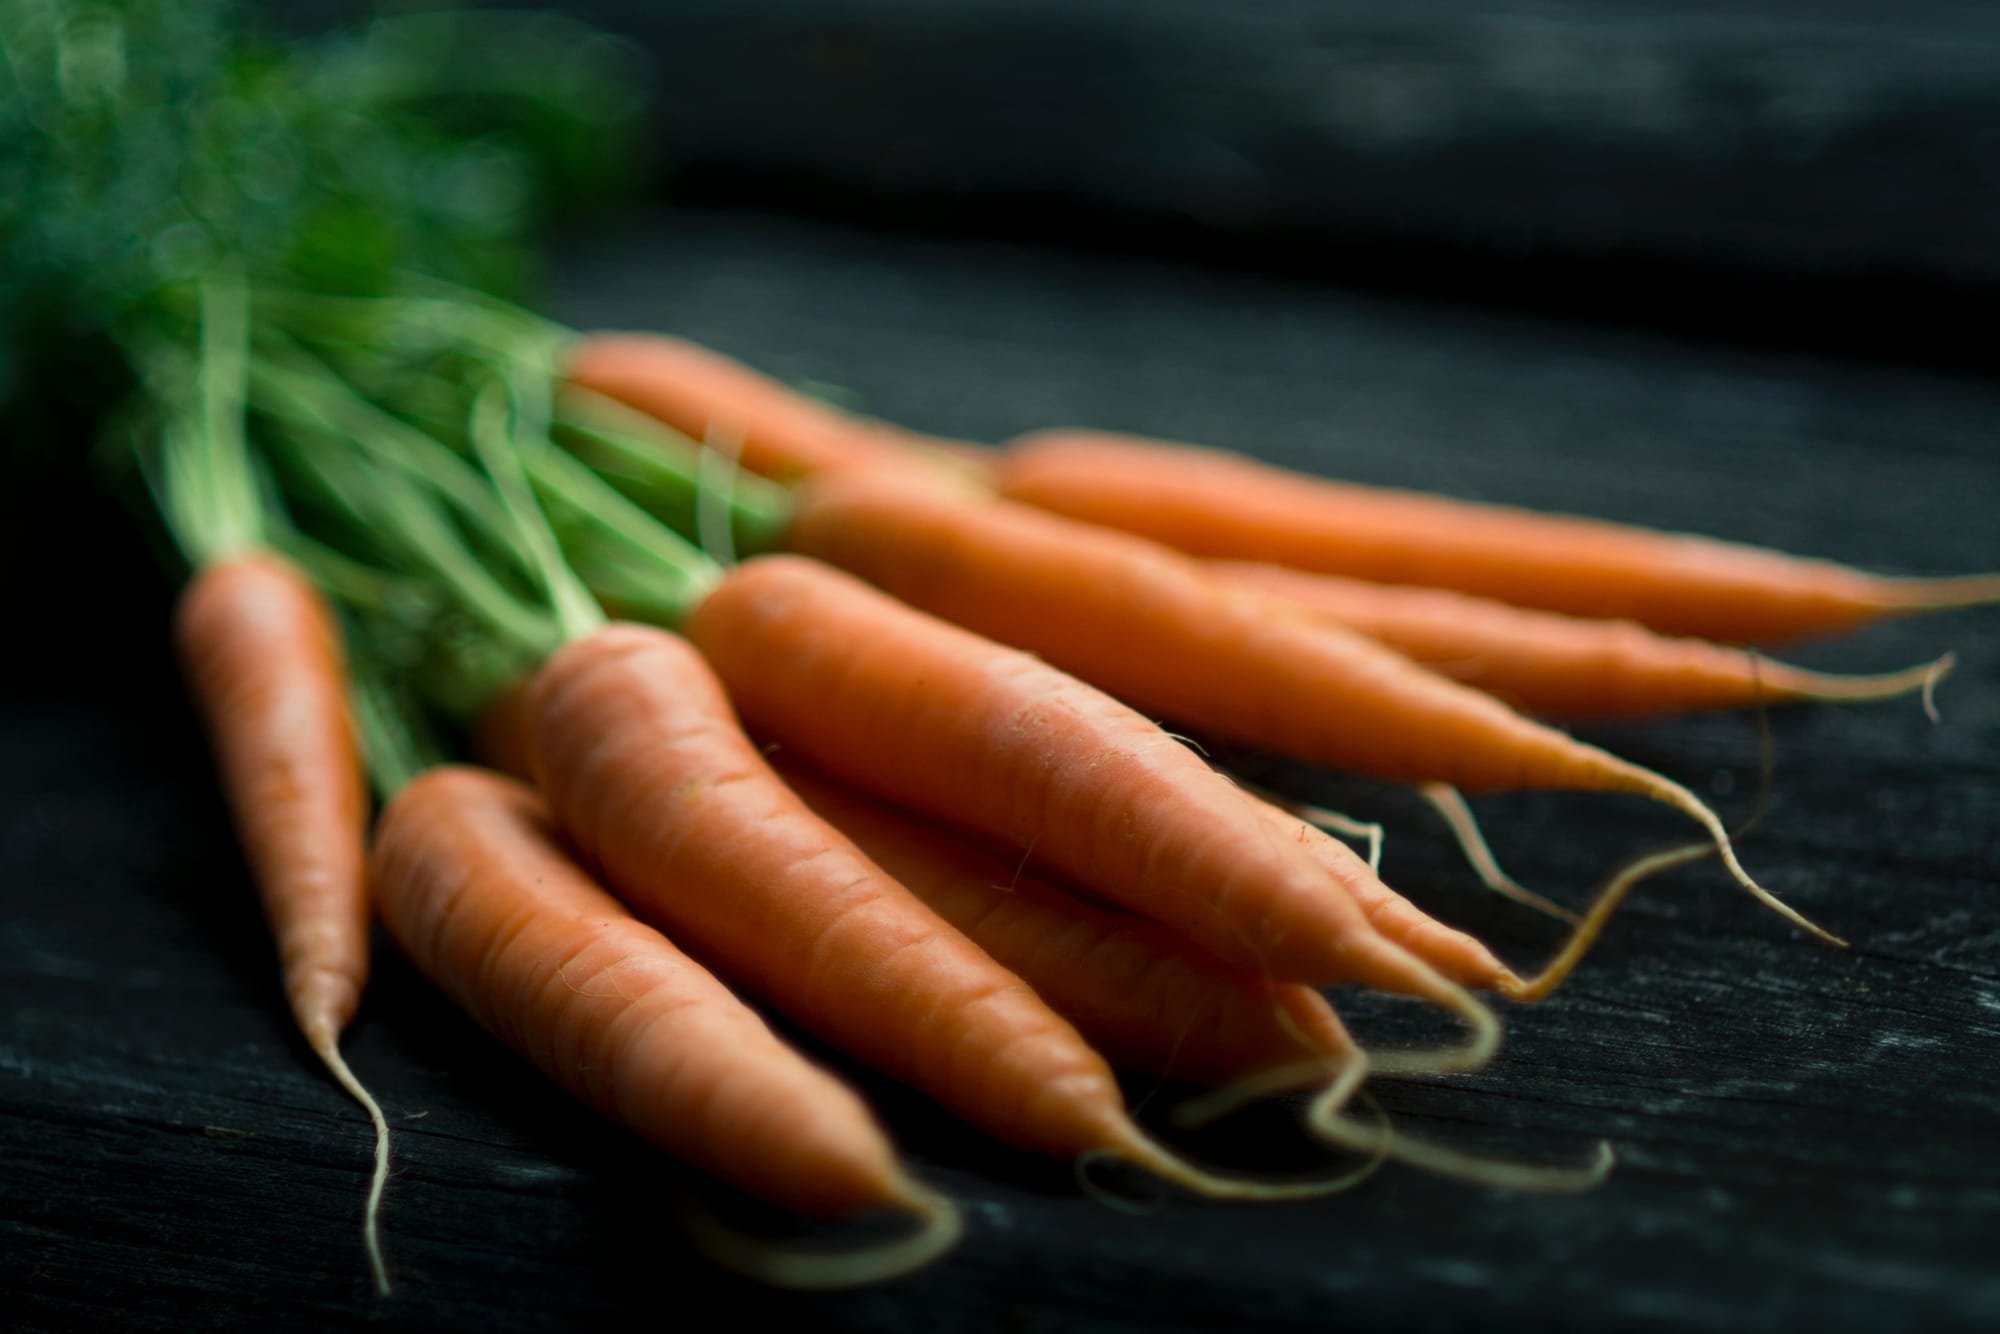 How to Make Carrot-Infused Oil